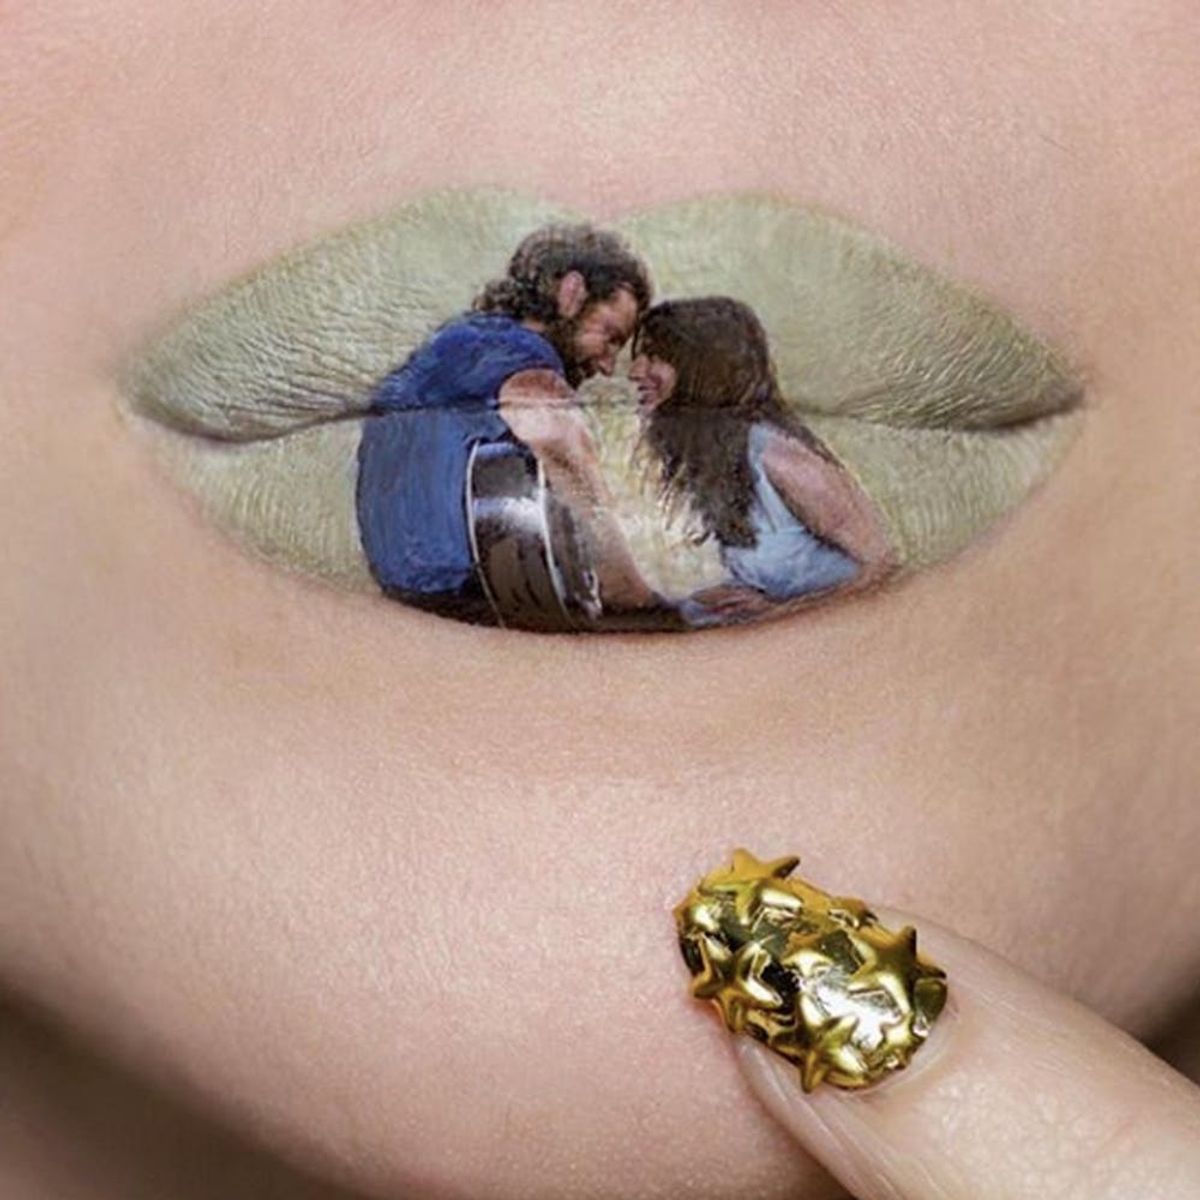 Makeup Artist Ryan Kelly Recreated Oscars’ Best Picture Nominees… on Her Lips